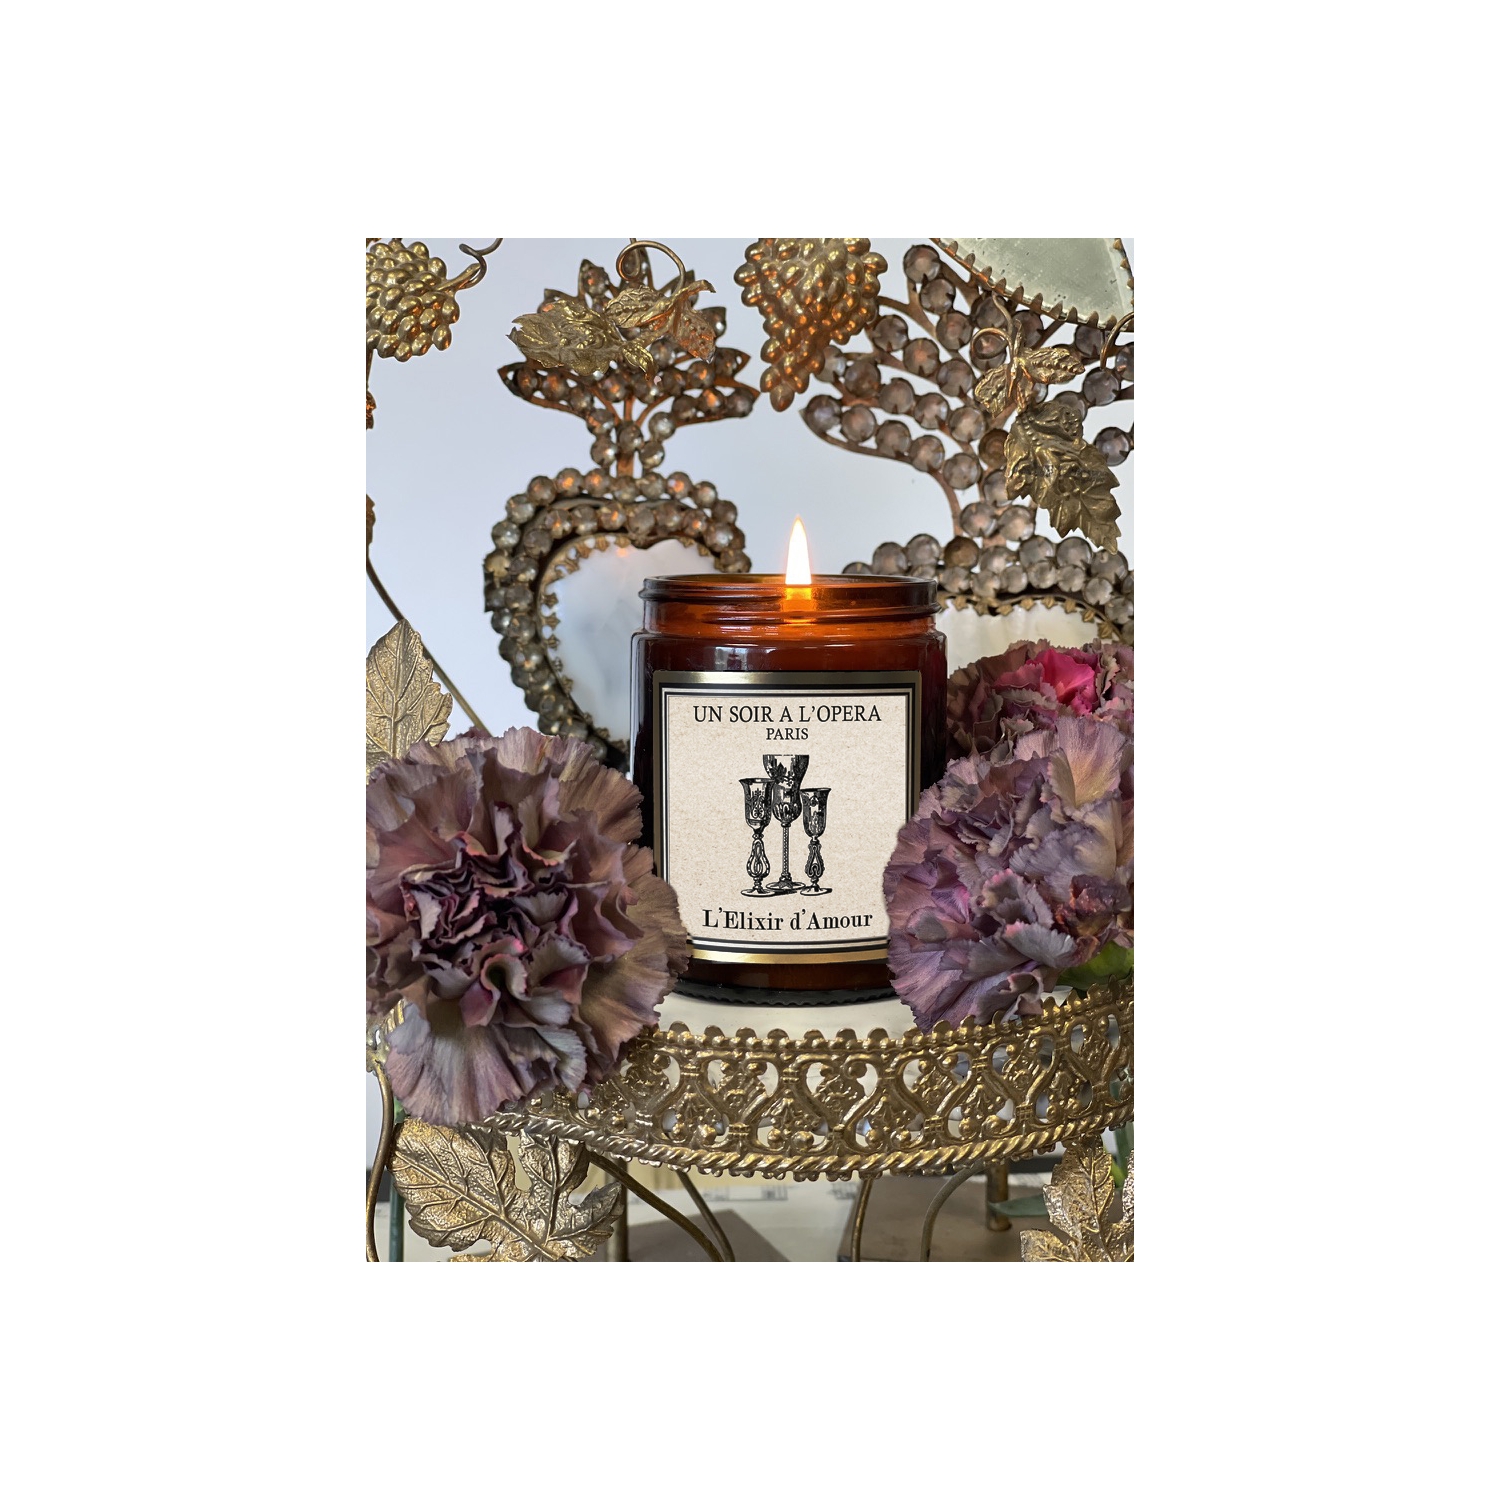 ELIXIR OF LOVE - Scented candle white glass - Infusion of spices and tea - 6 units